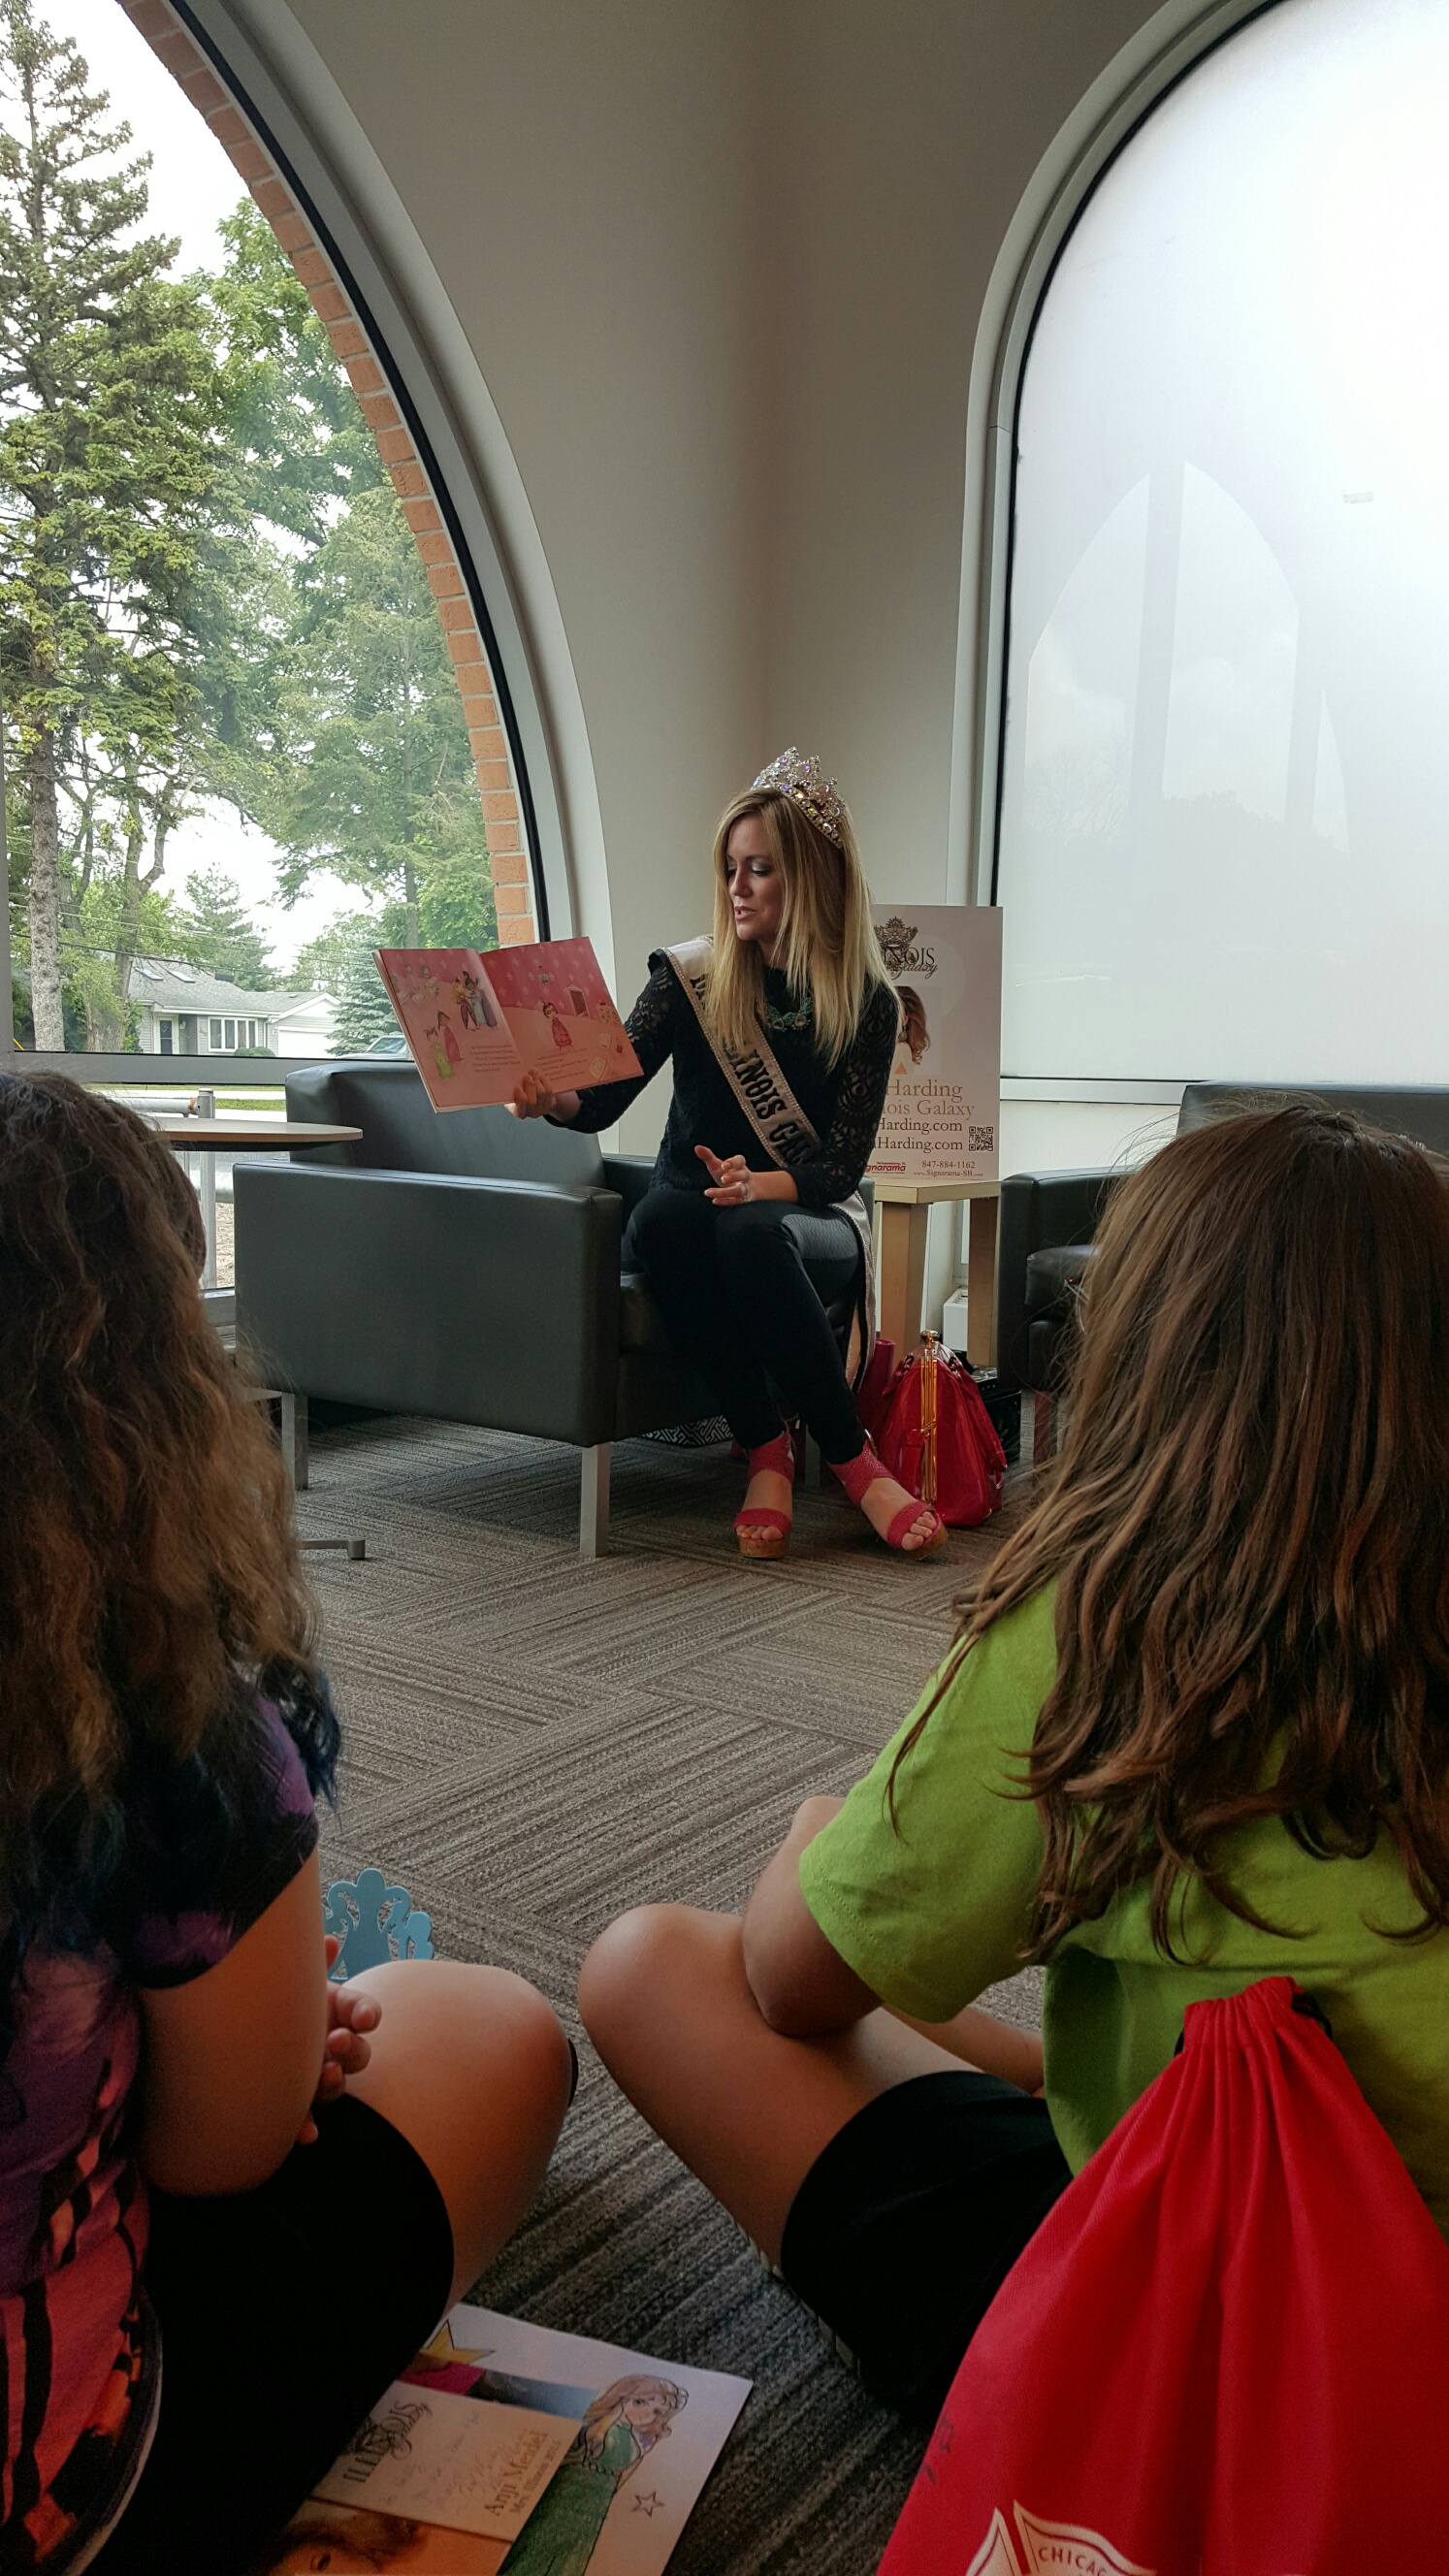 Kaili Harding, Ms. Illinois Galaxy 2015, reads a book to a group of children. Harding is also the president of the Schaumburg Business Association.